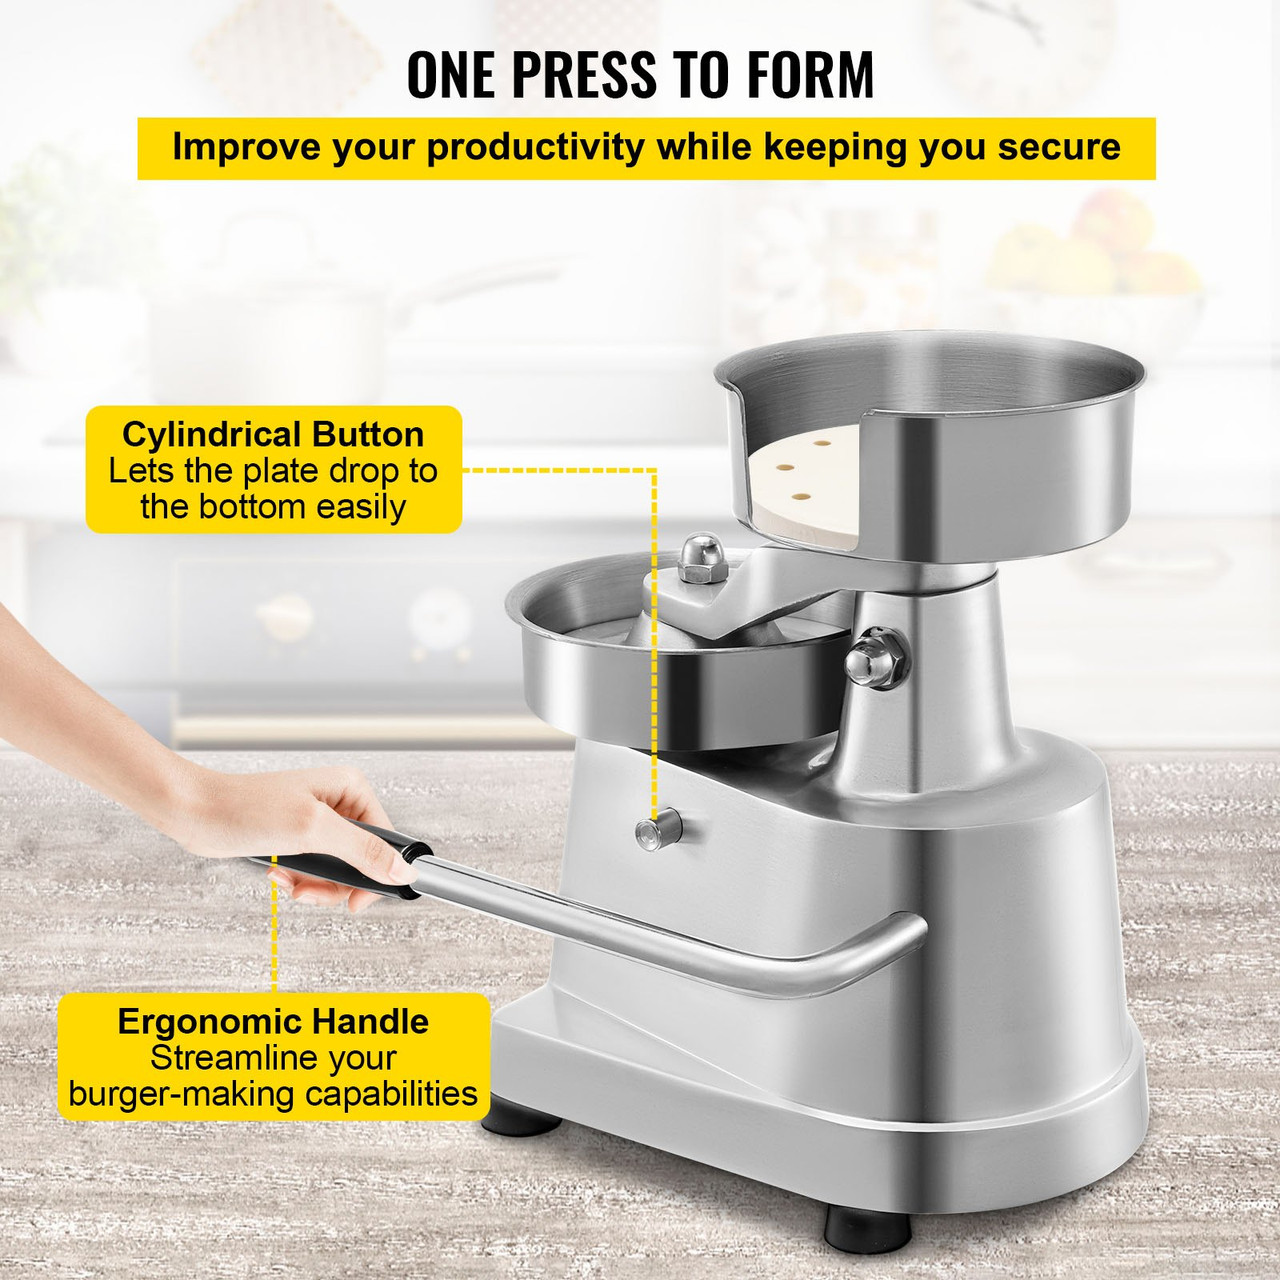 Commercial Hamburger Patty Maker 130mm/5inch Stainless Steel Burger Press Heavy Duty Hamburger Press Meat Patty Maker Hamburger Forming Processor with 1000 Pcs Patty Papers